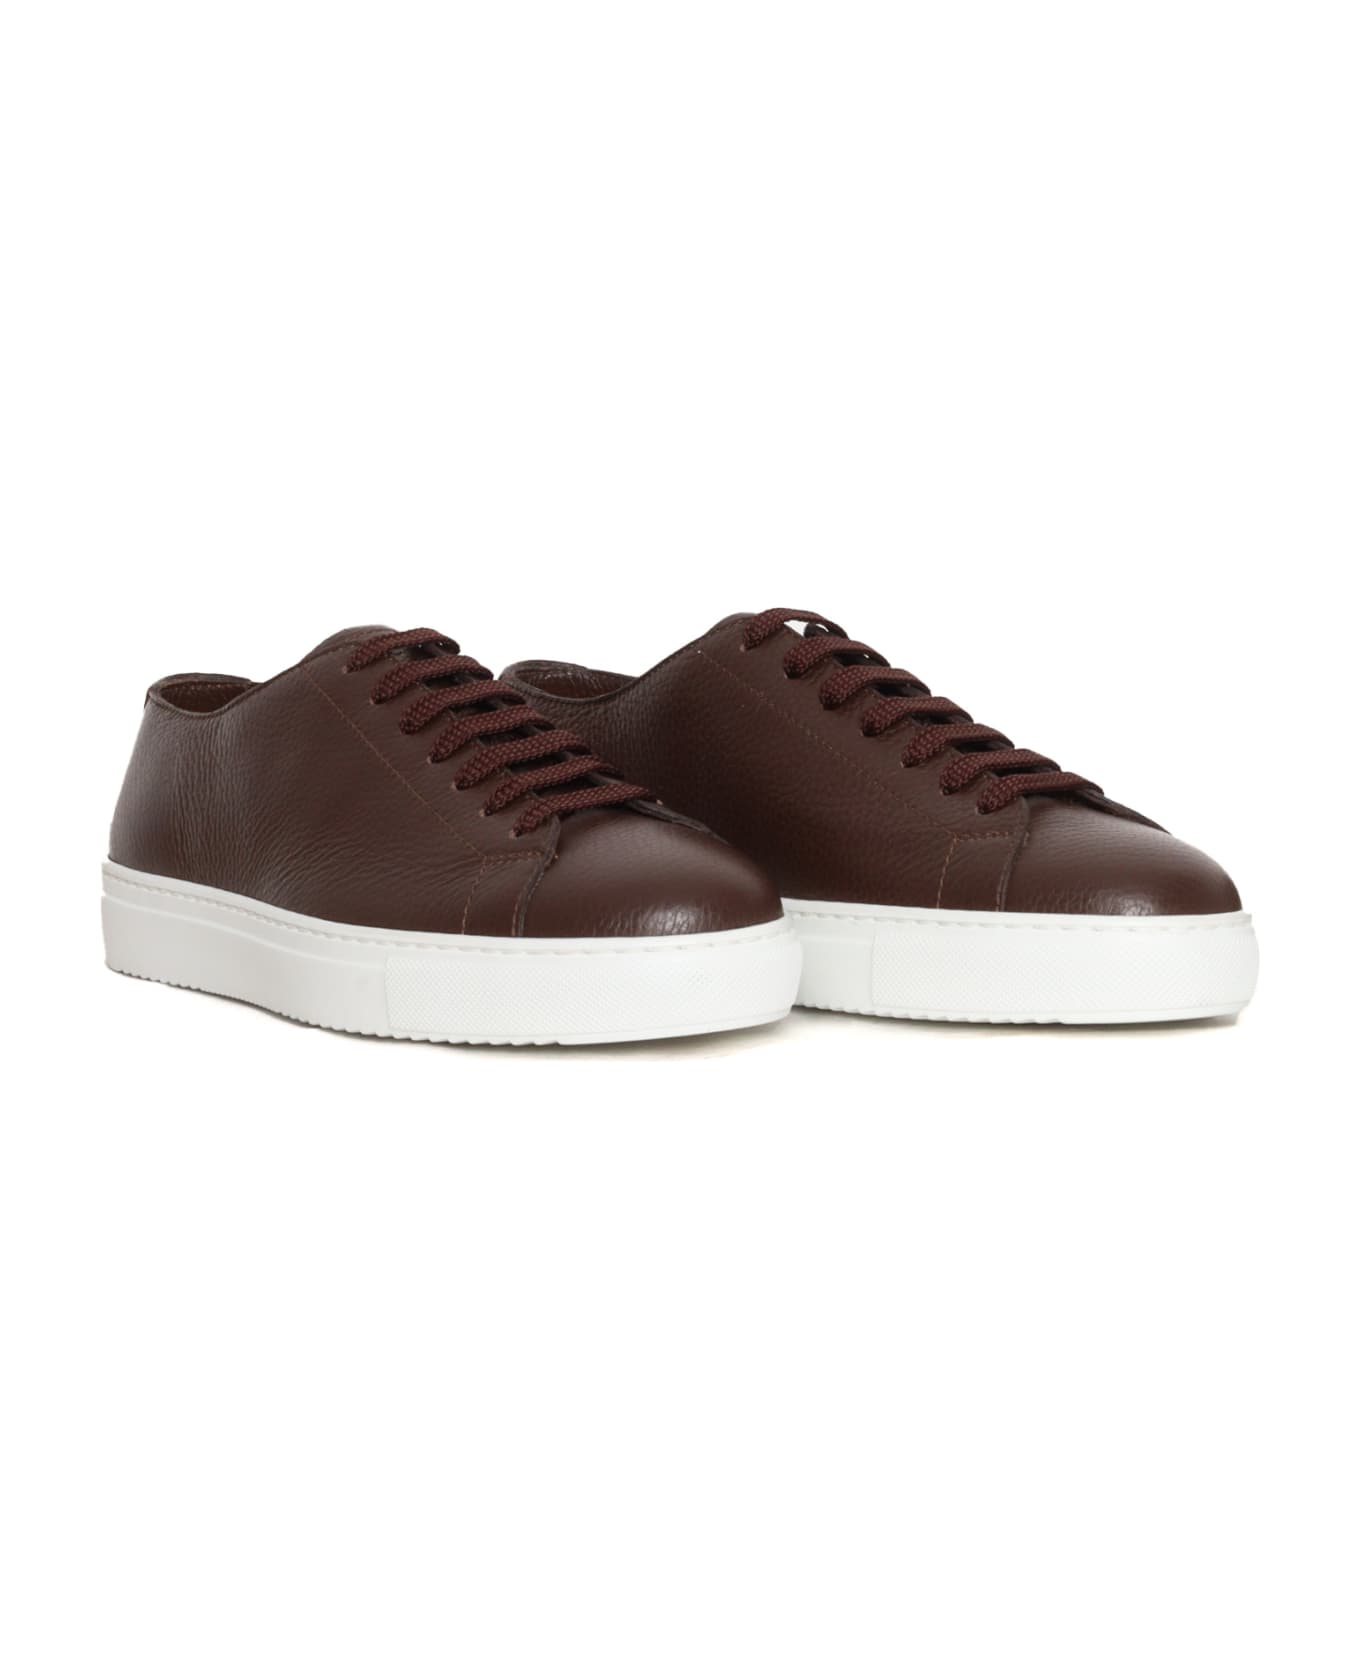 Doucal's Brown Leather Sneakers - BROWN